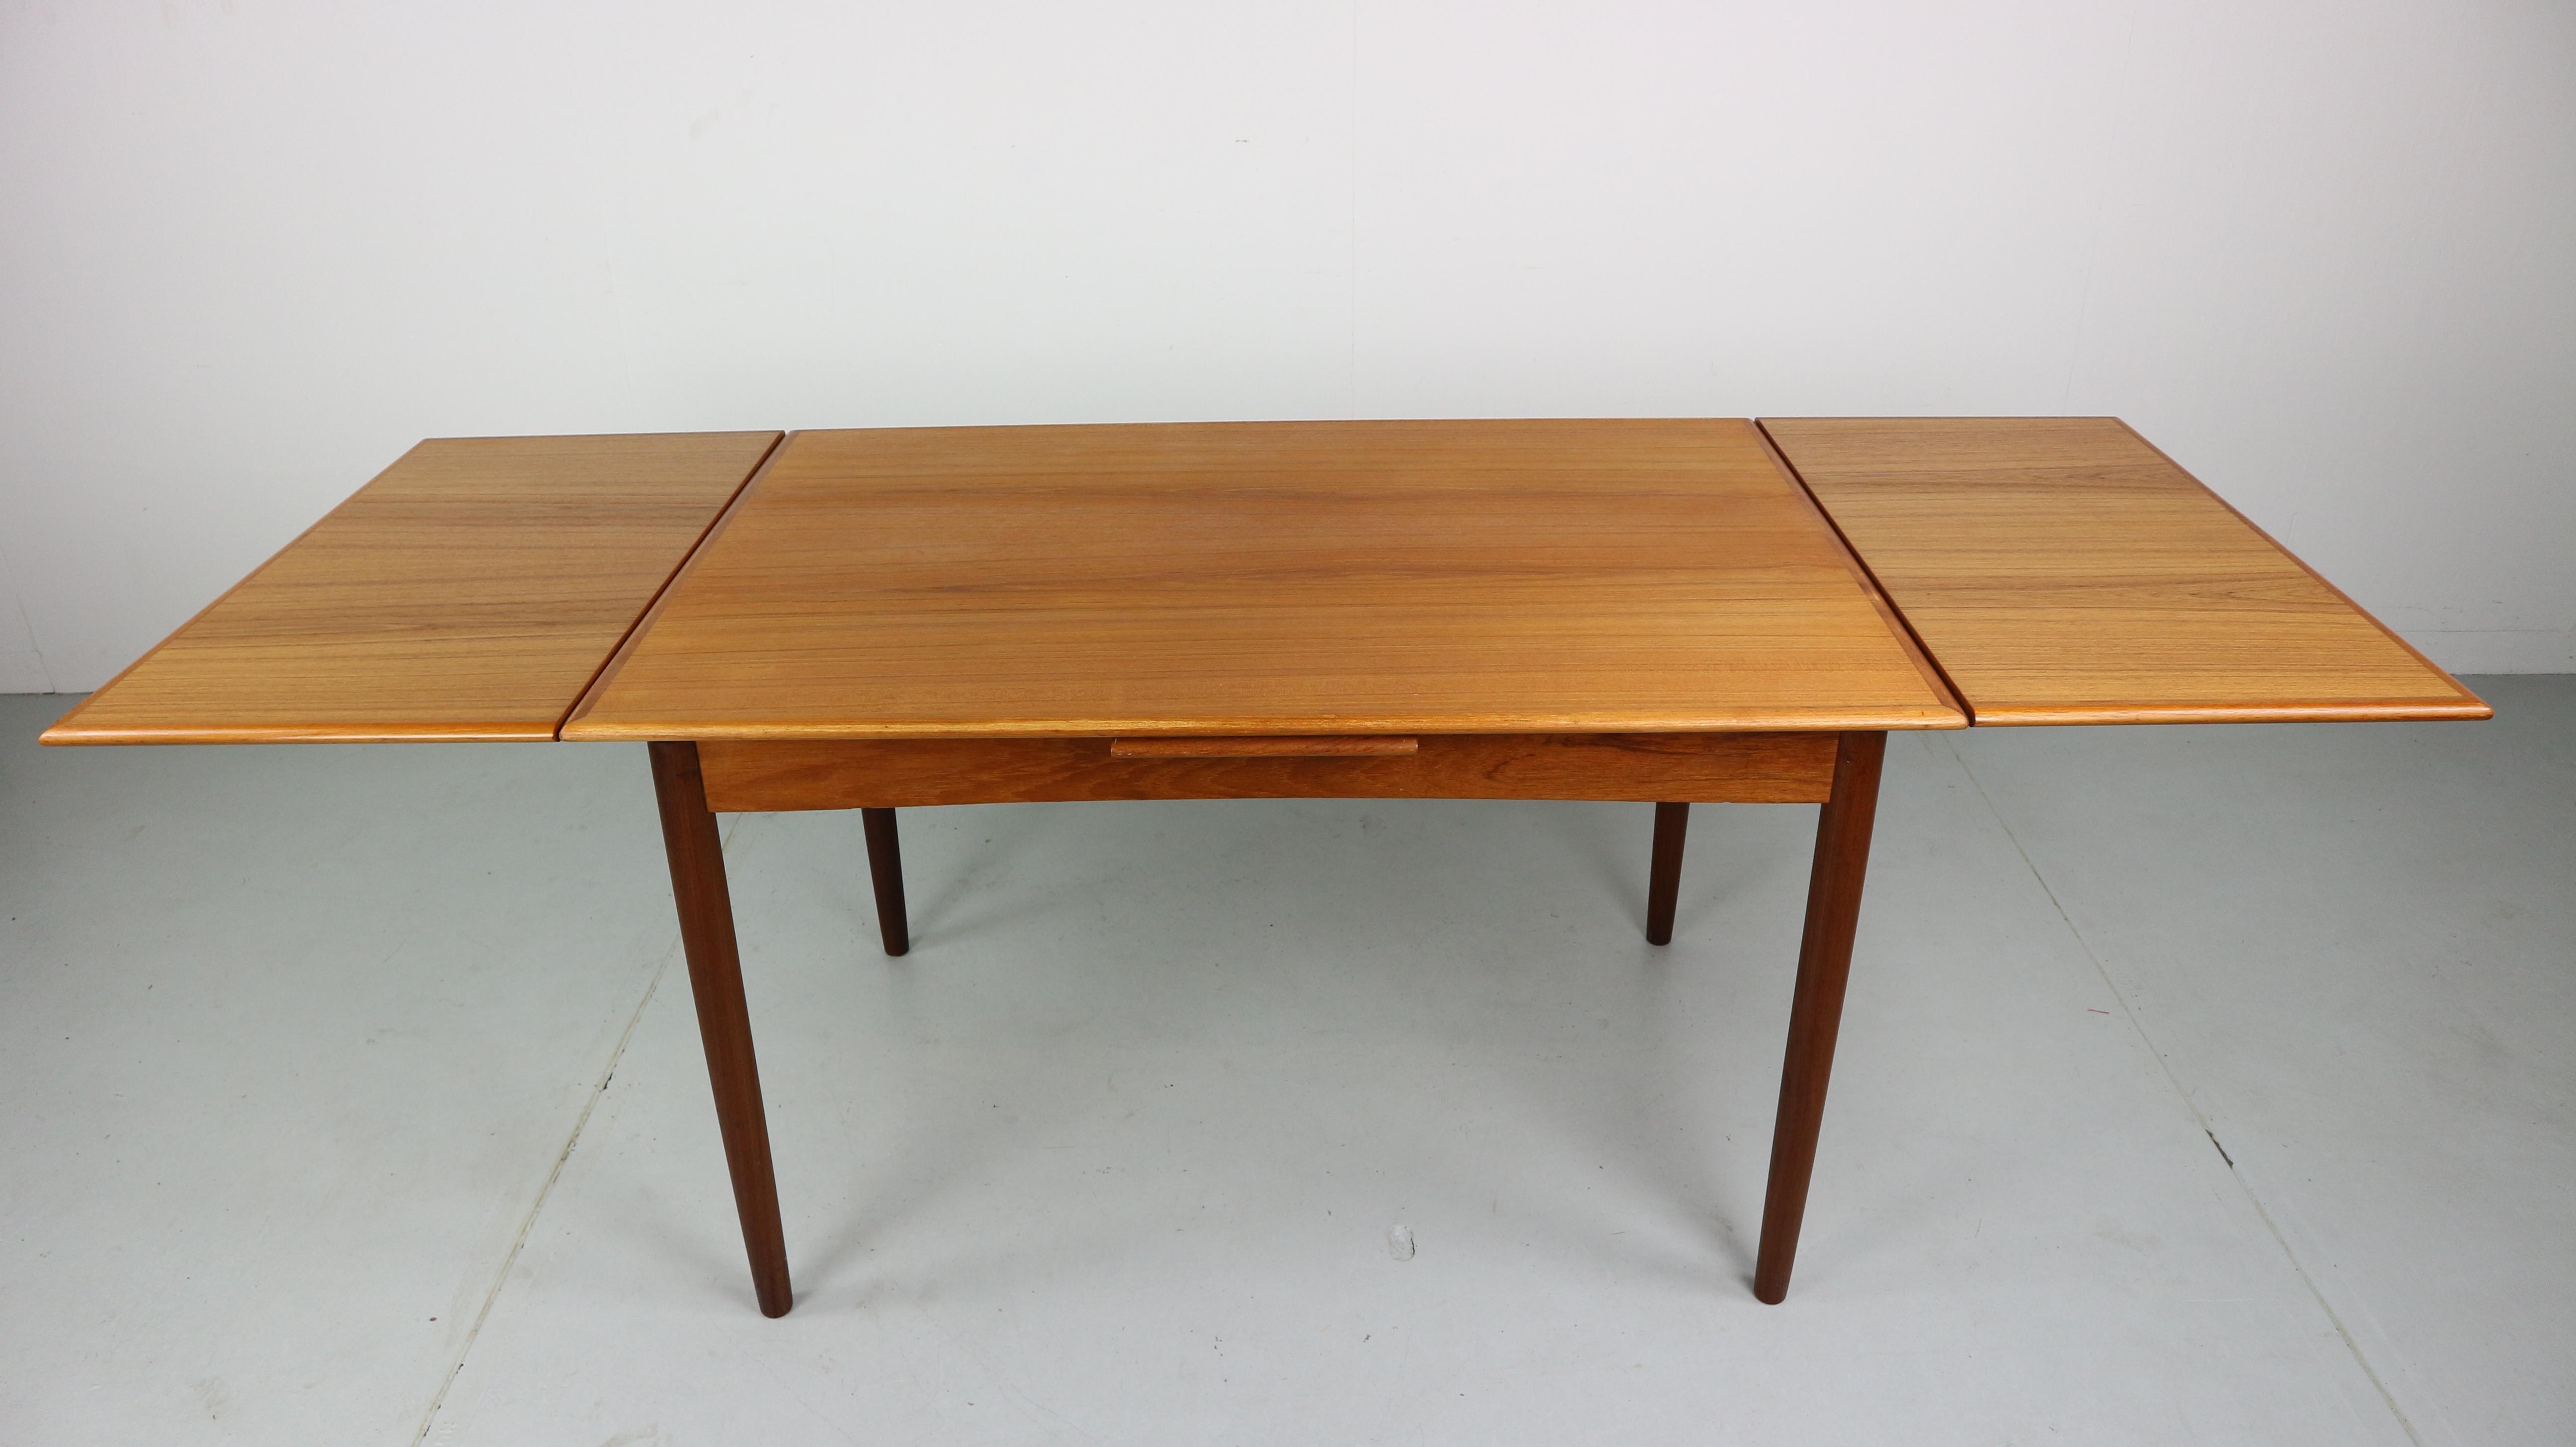 Midcentury extendable teak wood dining table.
Made in Denmark, 1960s.
Dimensions: 120cm / 47.2 inch. Extendable 211cm / 84.2inch.

A small spot on the table top were the veneer is a little thin but not damaged. 